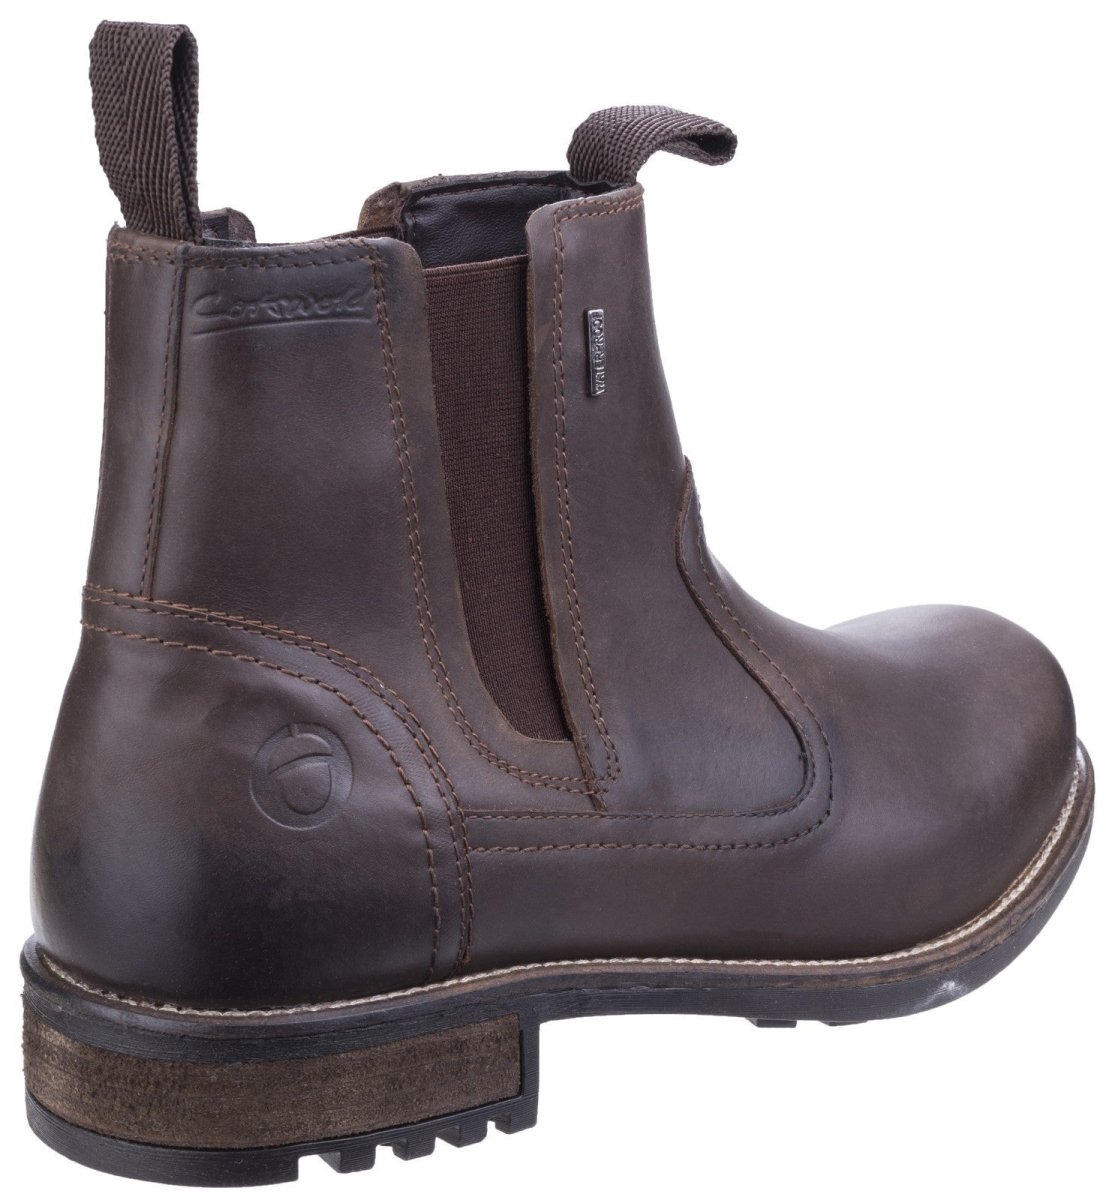 Cotswold Worcester Mens Boots - Shoe Store Direct